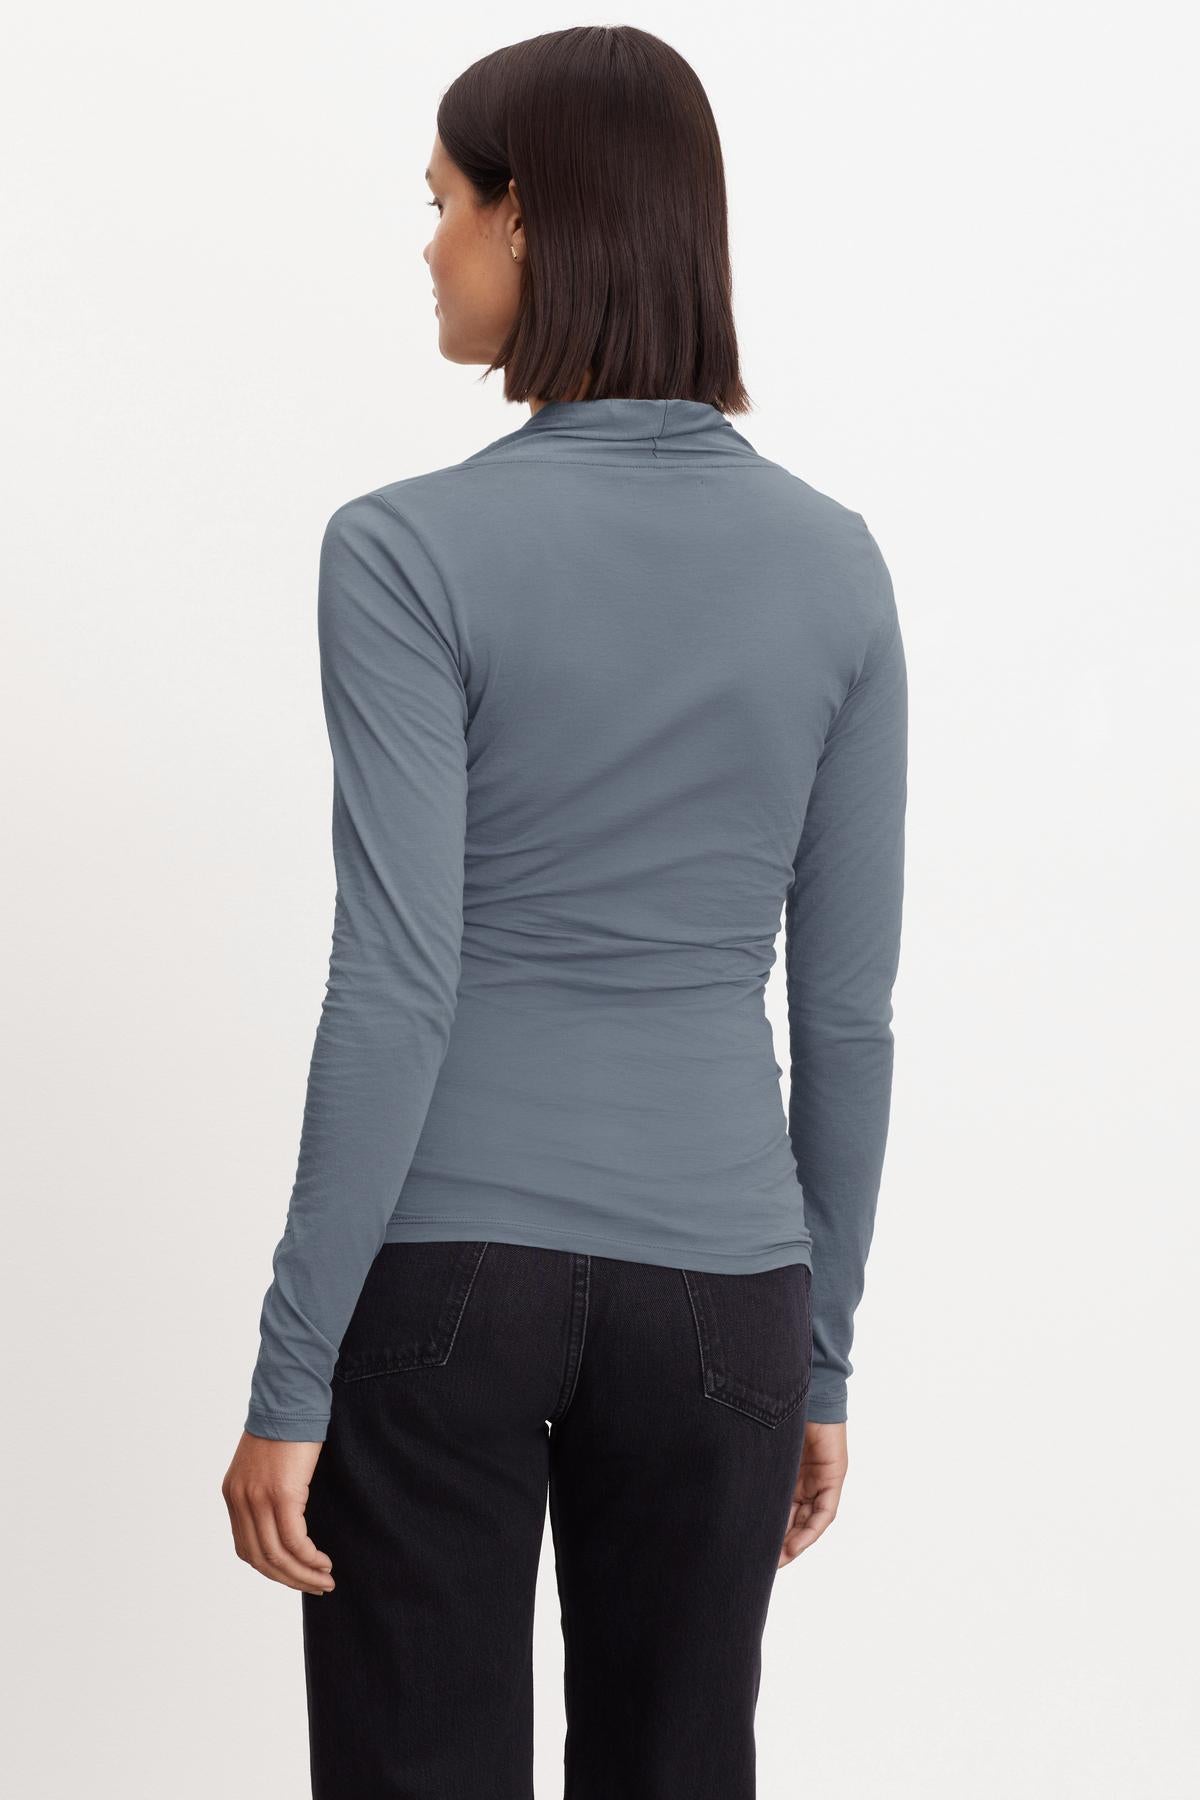 The back view of a woman wearing a Velvet by Graham & Spencer MERI WRAP FRONT FITTED TOP.-36094410621121